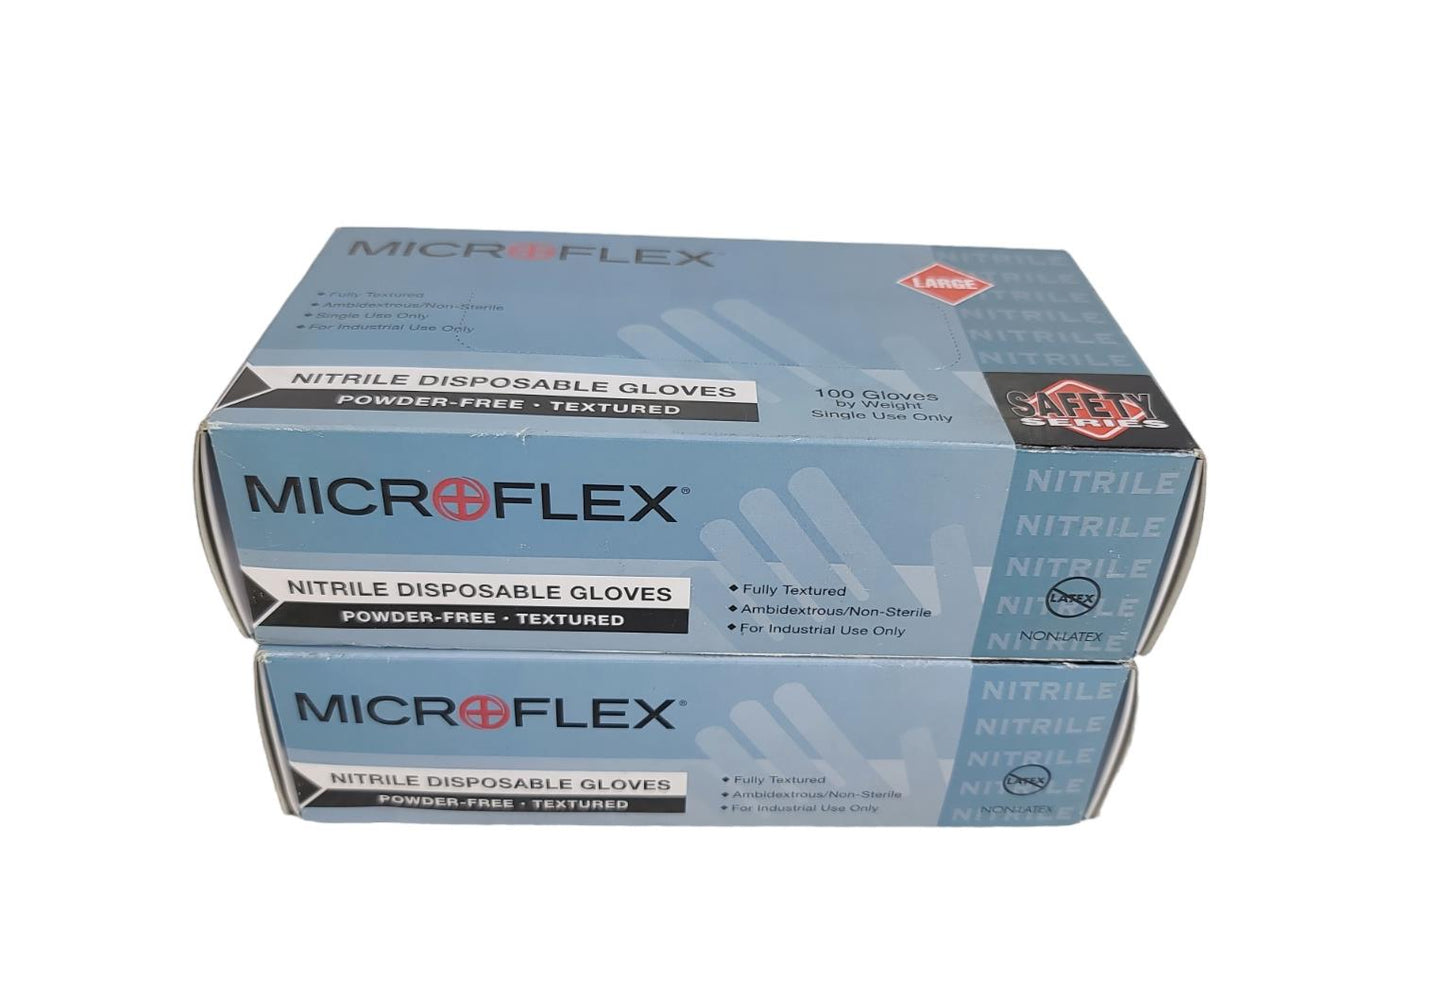 Lots Of 2 Microflex Nitrile Disposable 100 Gloves 19514701 New Open Box